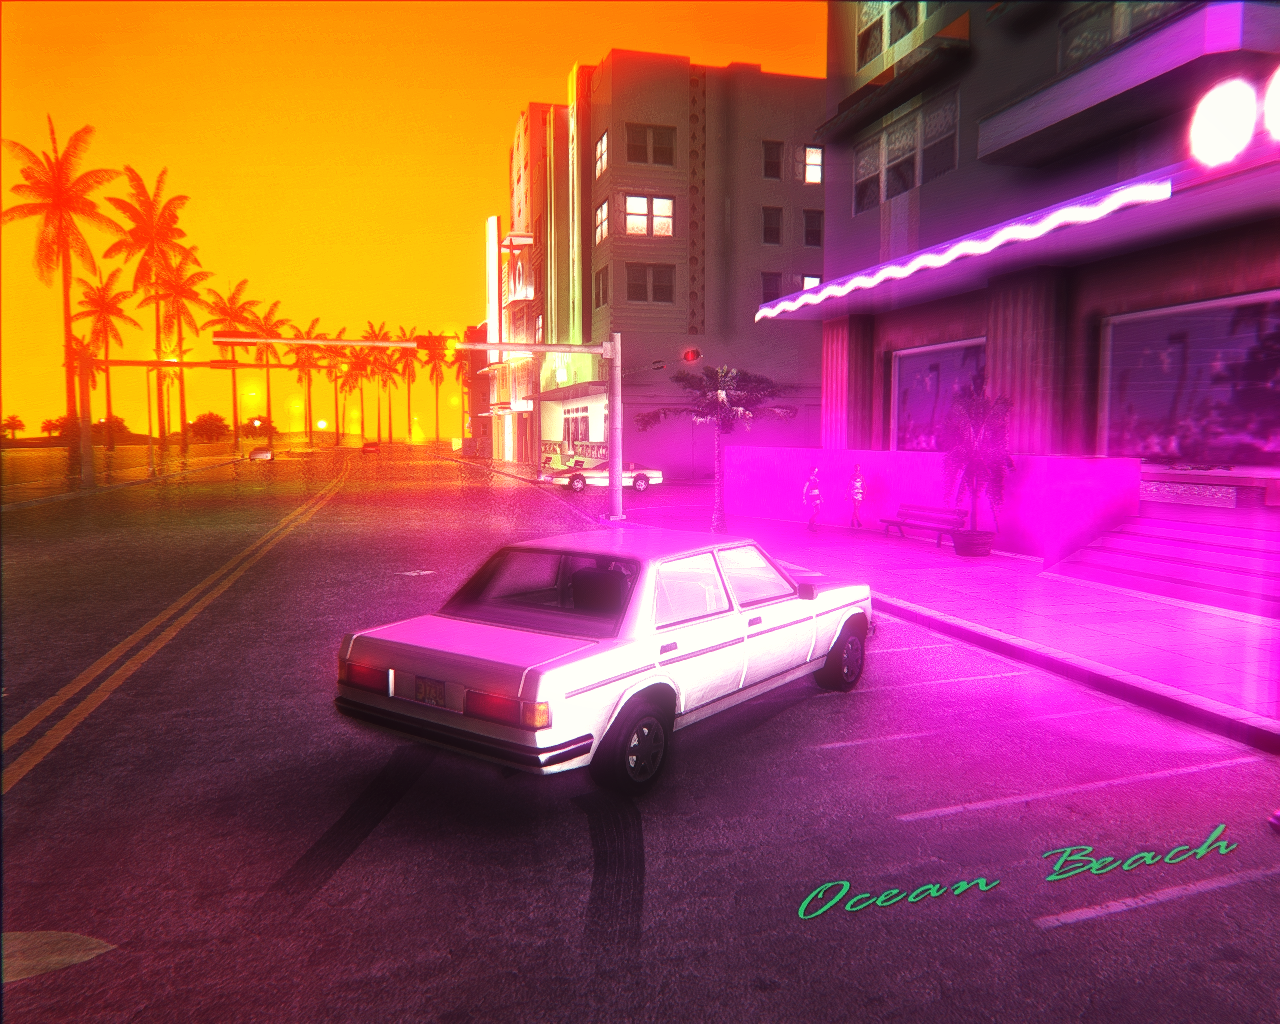 Image 17 Vice City Revisited Beta V1.0 mod for Grand Theft Auto: Vice City